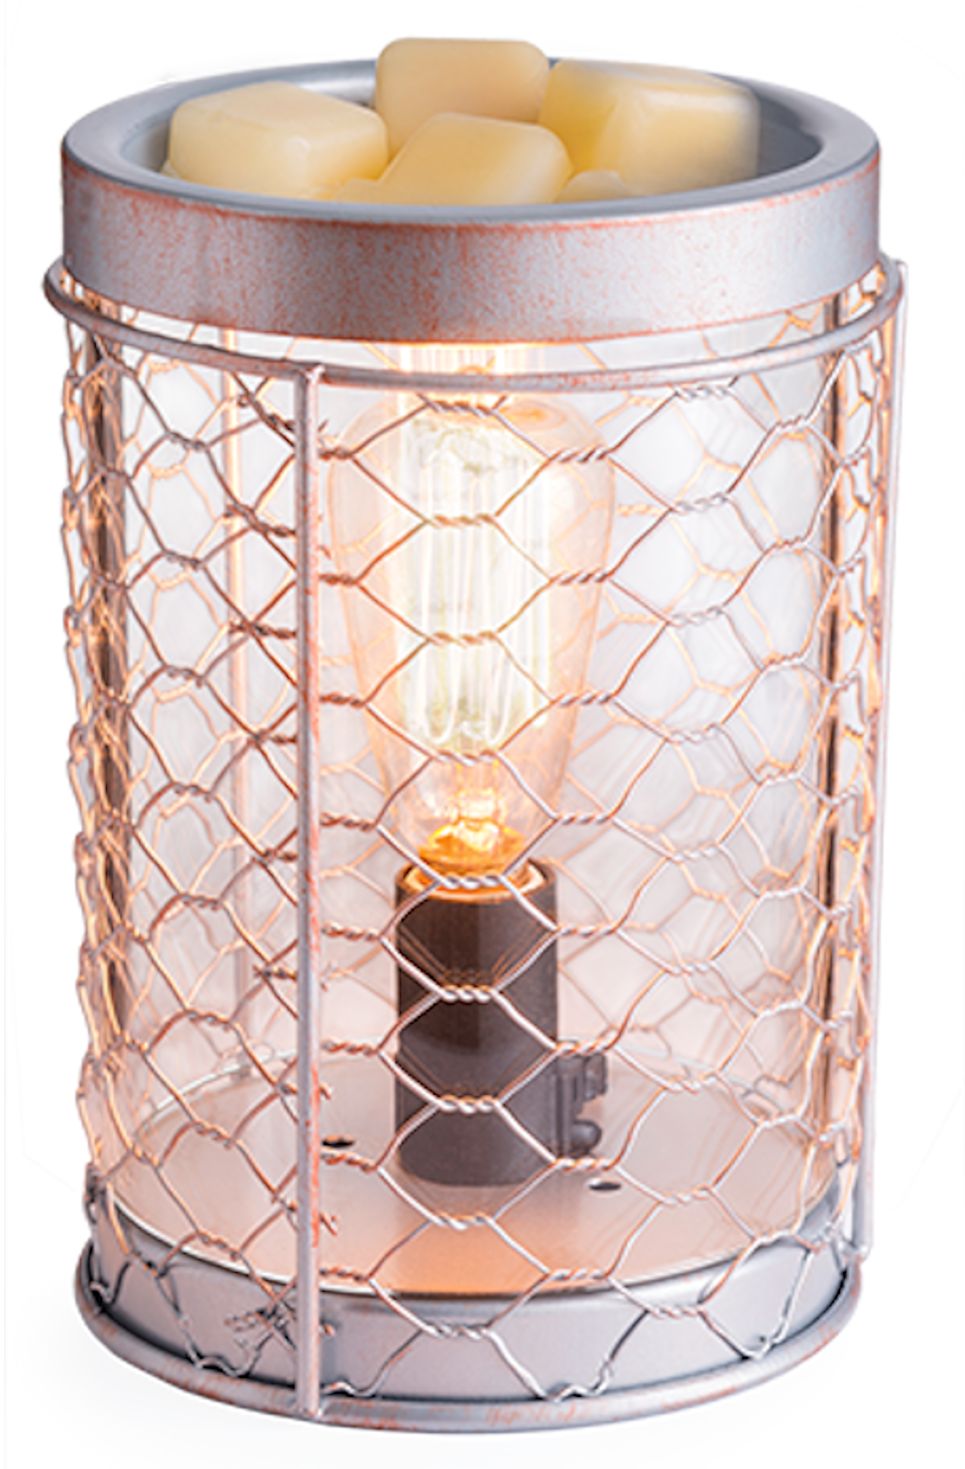 CHICKEN WIRE VINTAGE Bulb Illumination Fragrance Warmer by Candle Warmers